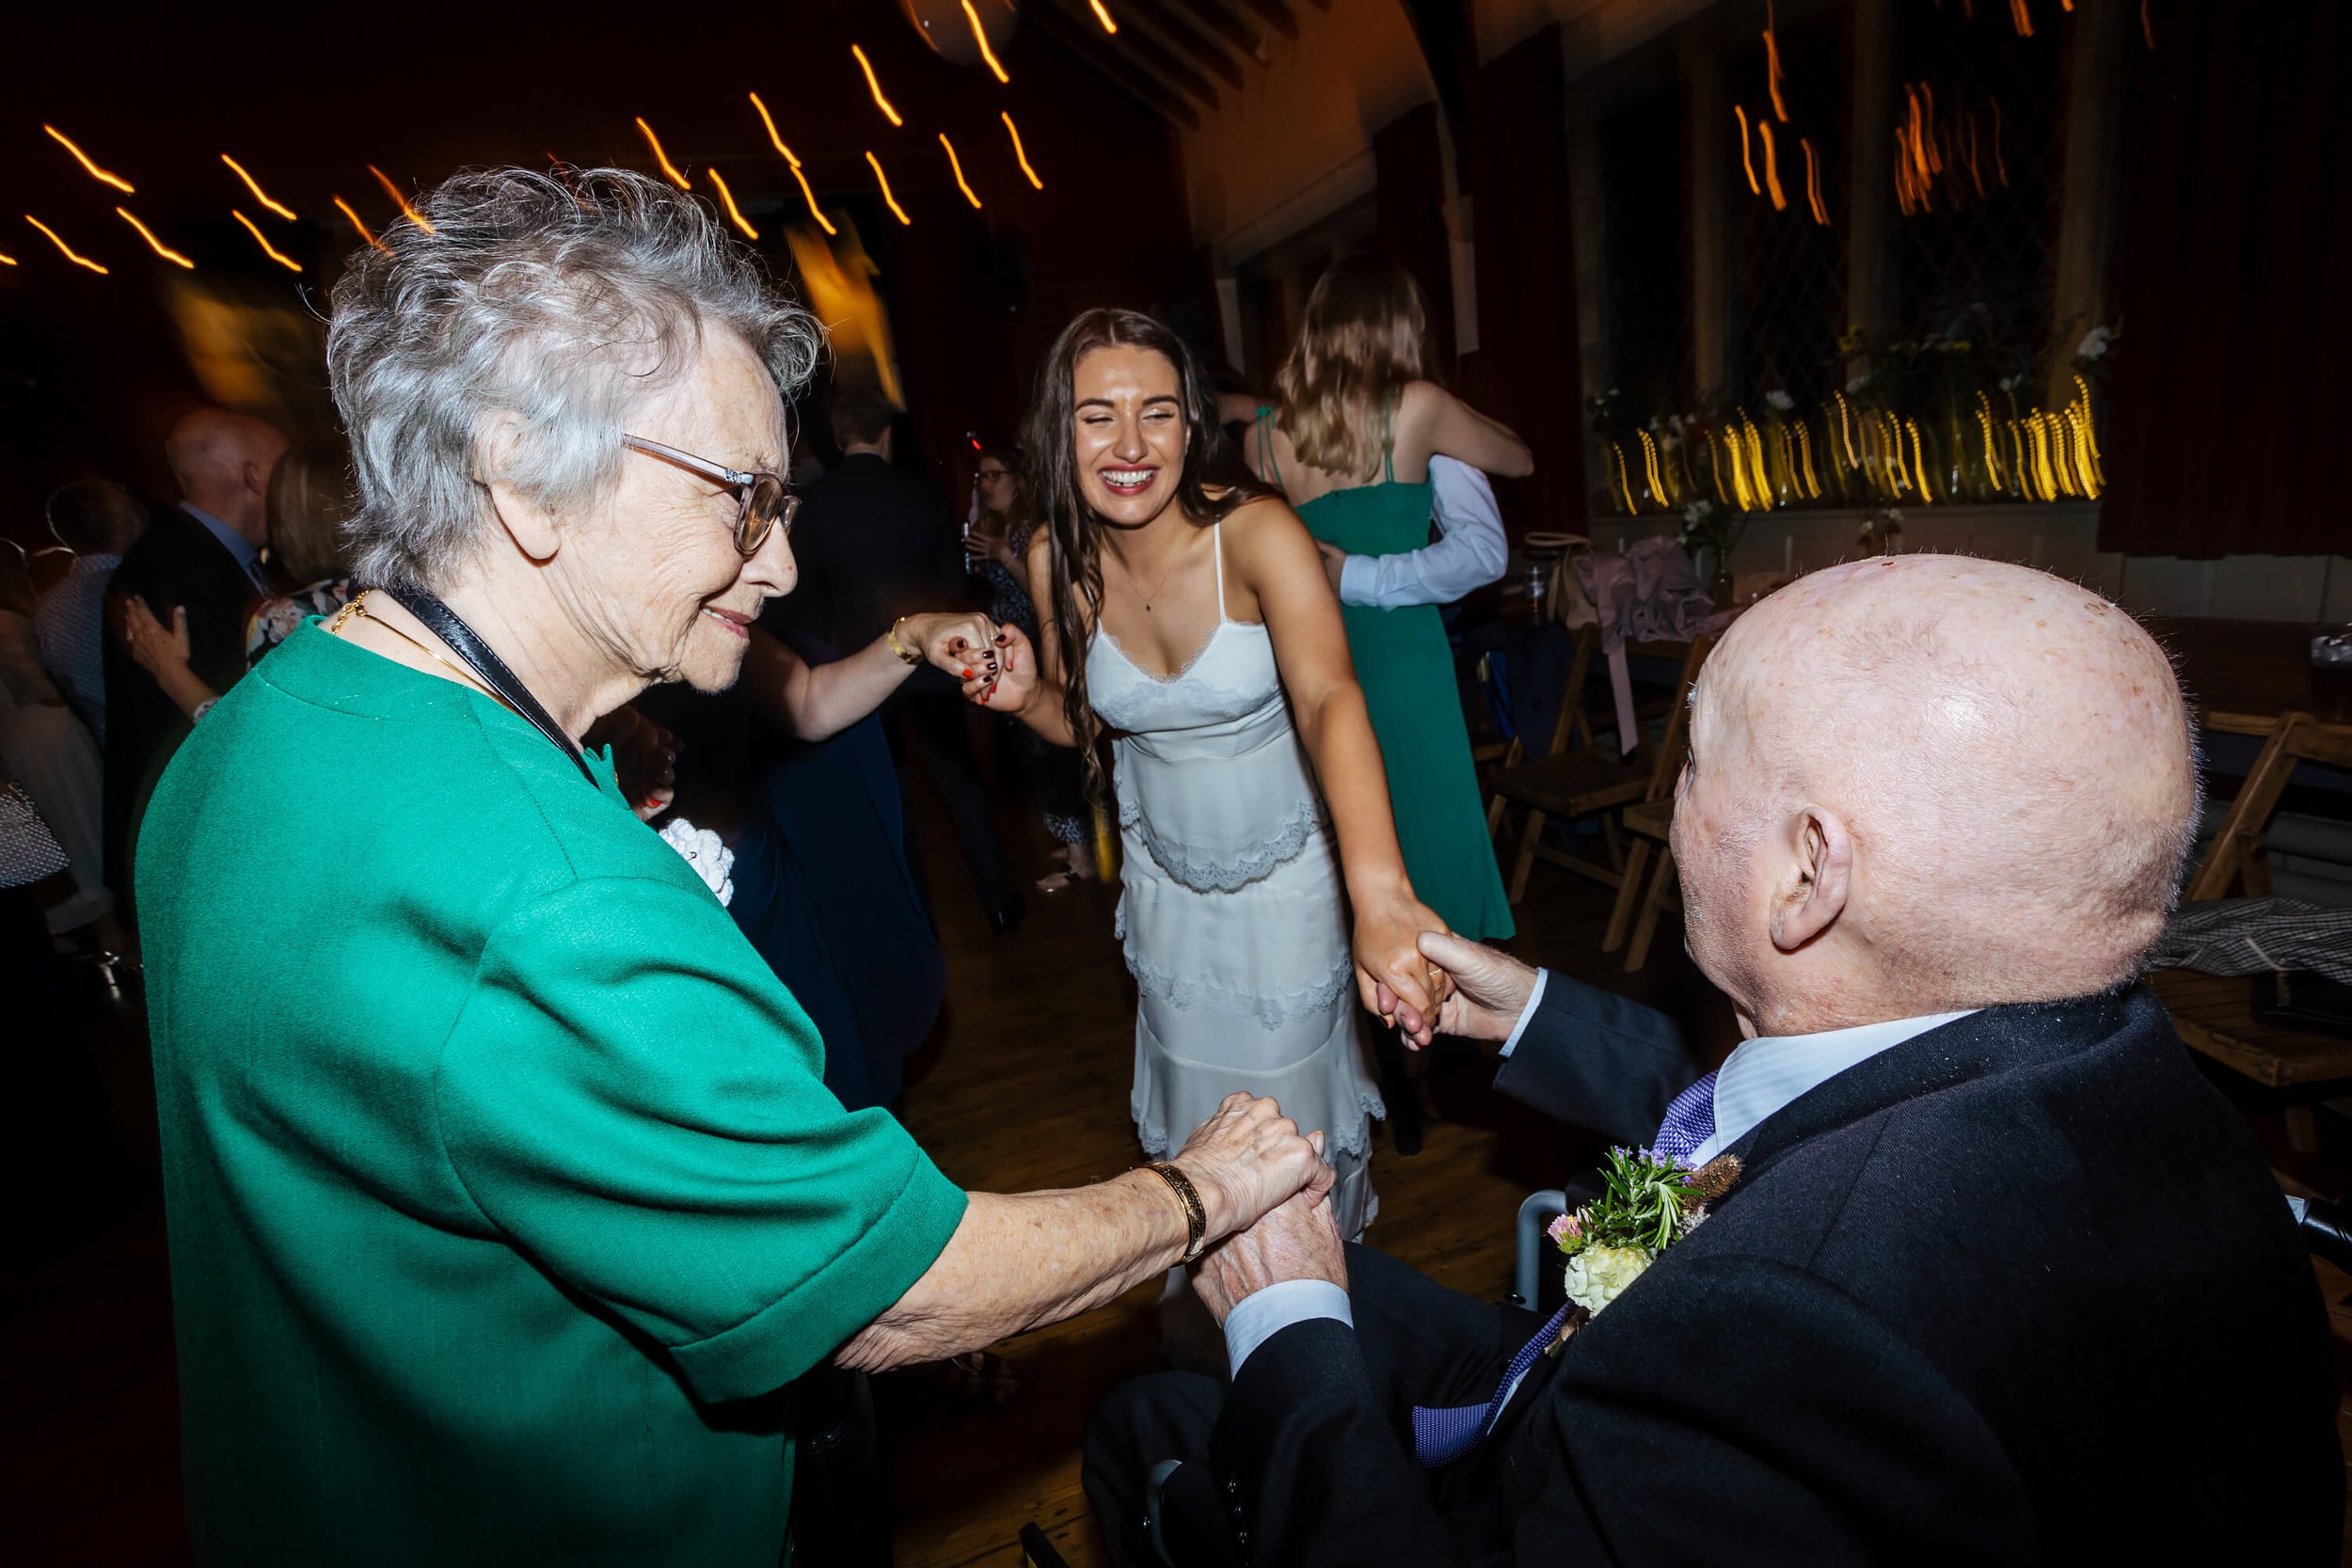 Bride dancing with her grandparents at the wedding